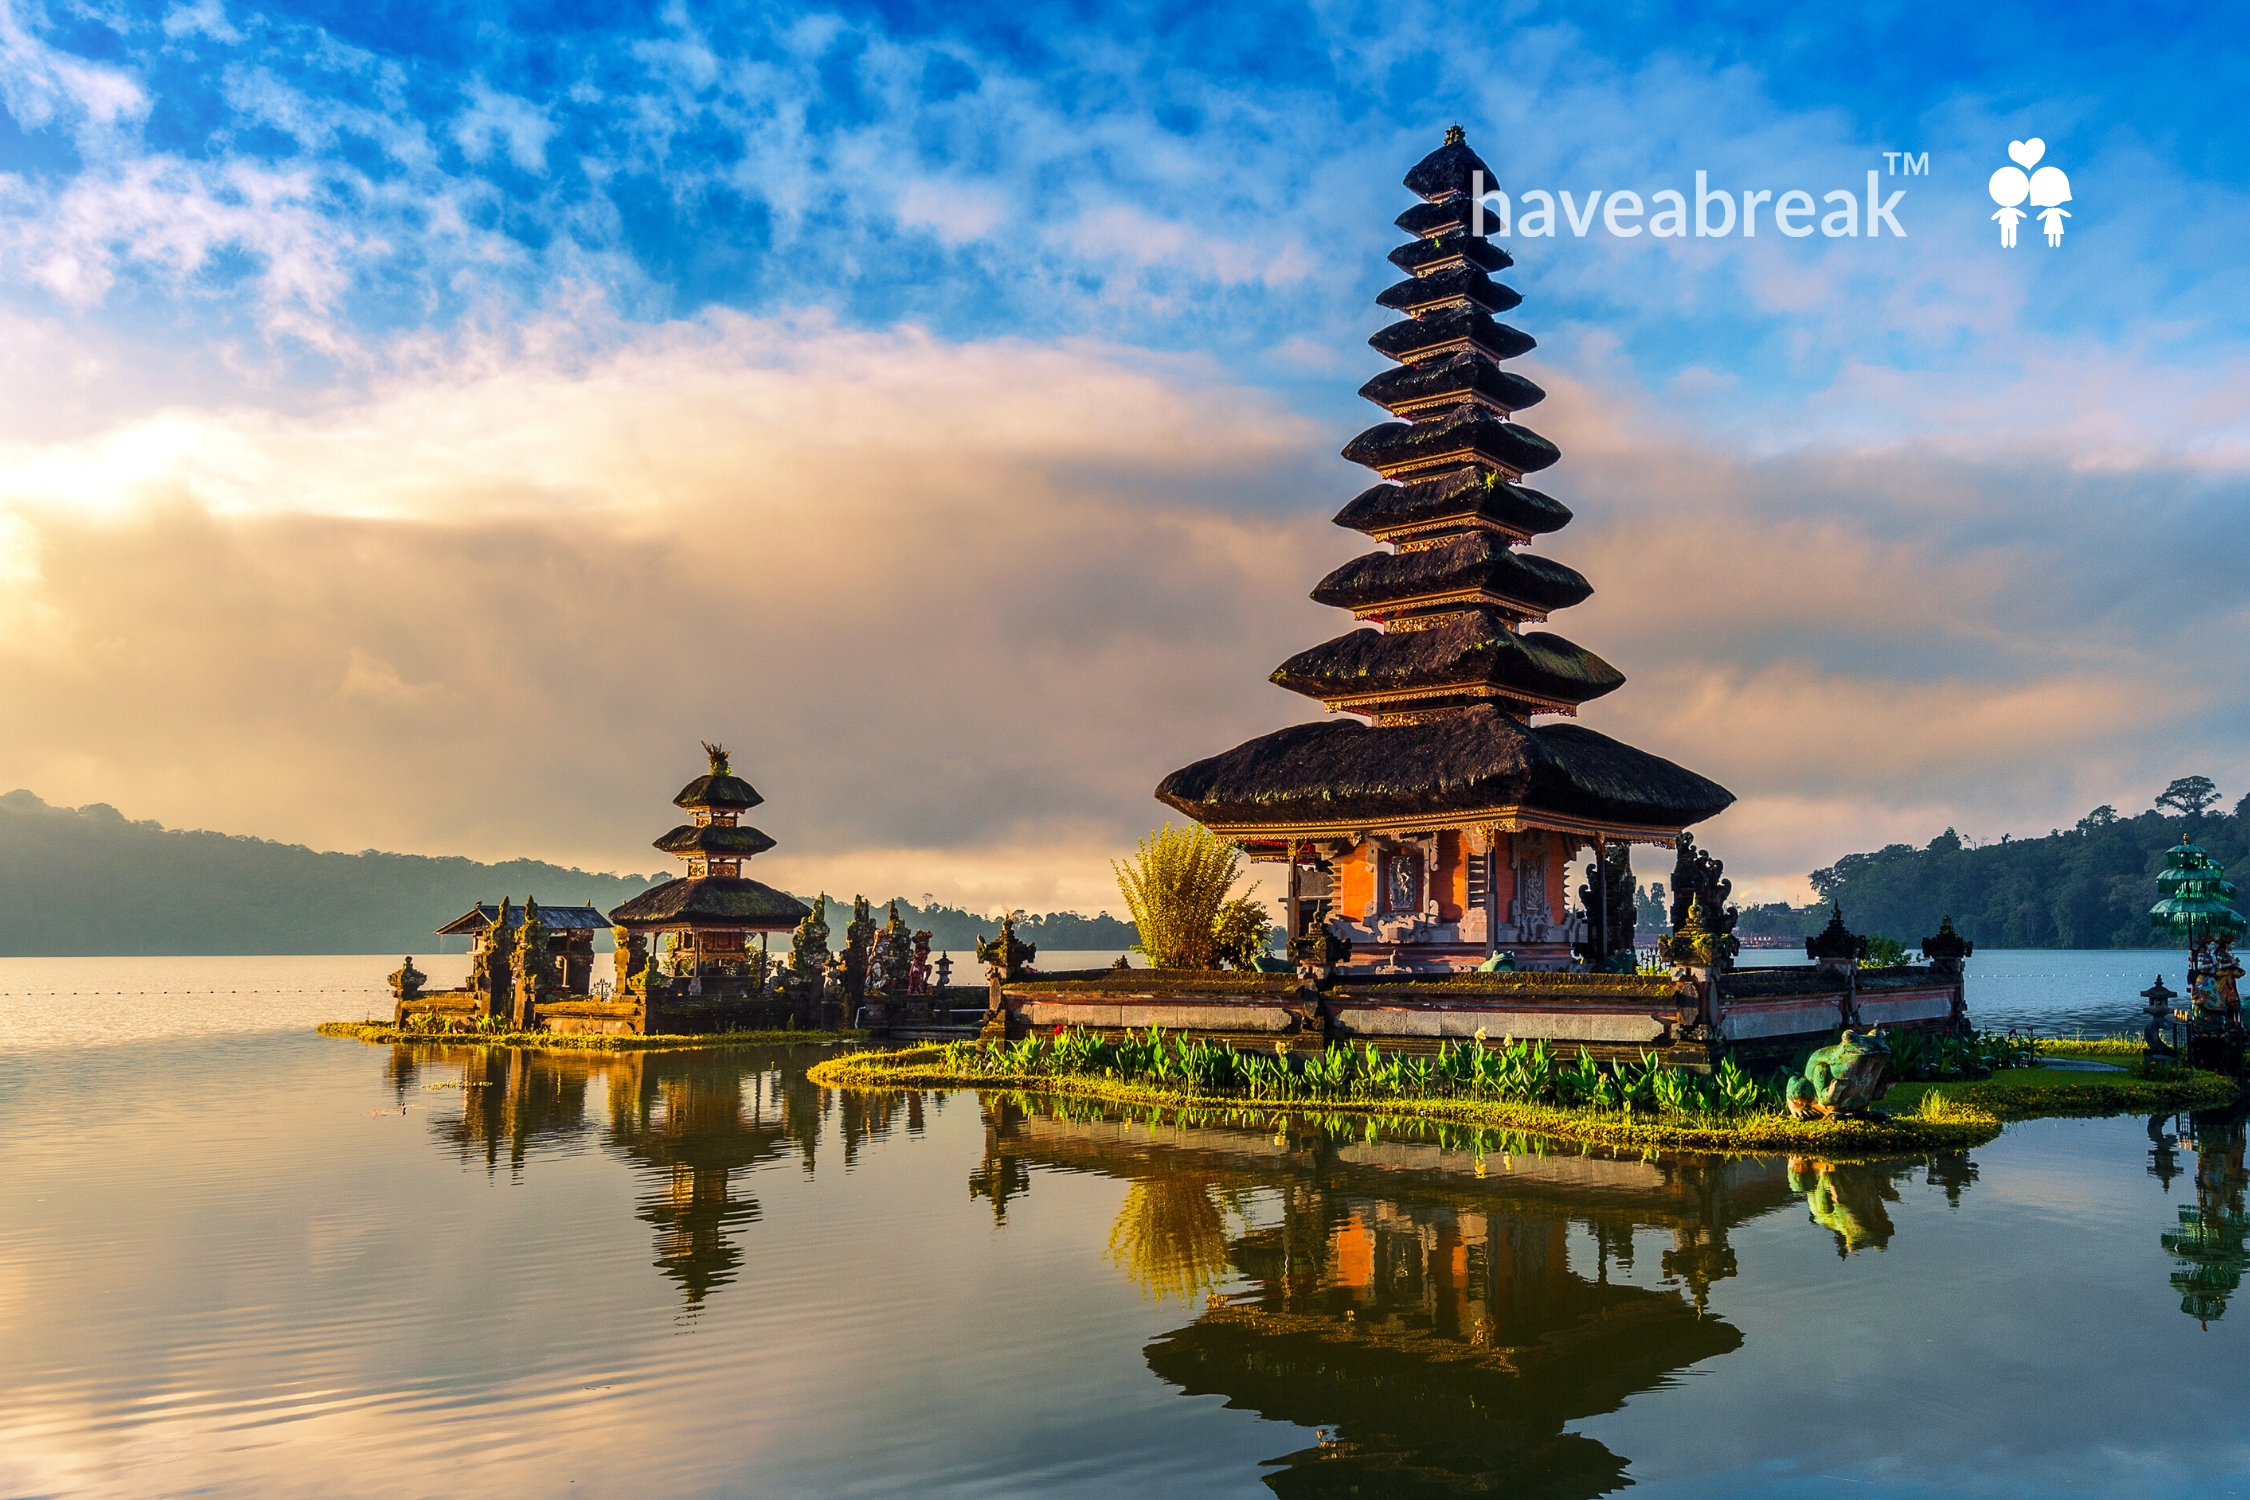 bali indonesia honeymoon package tour with airfare